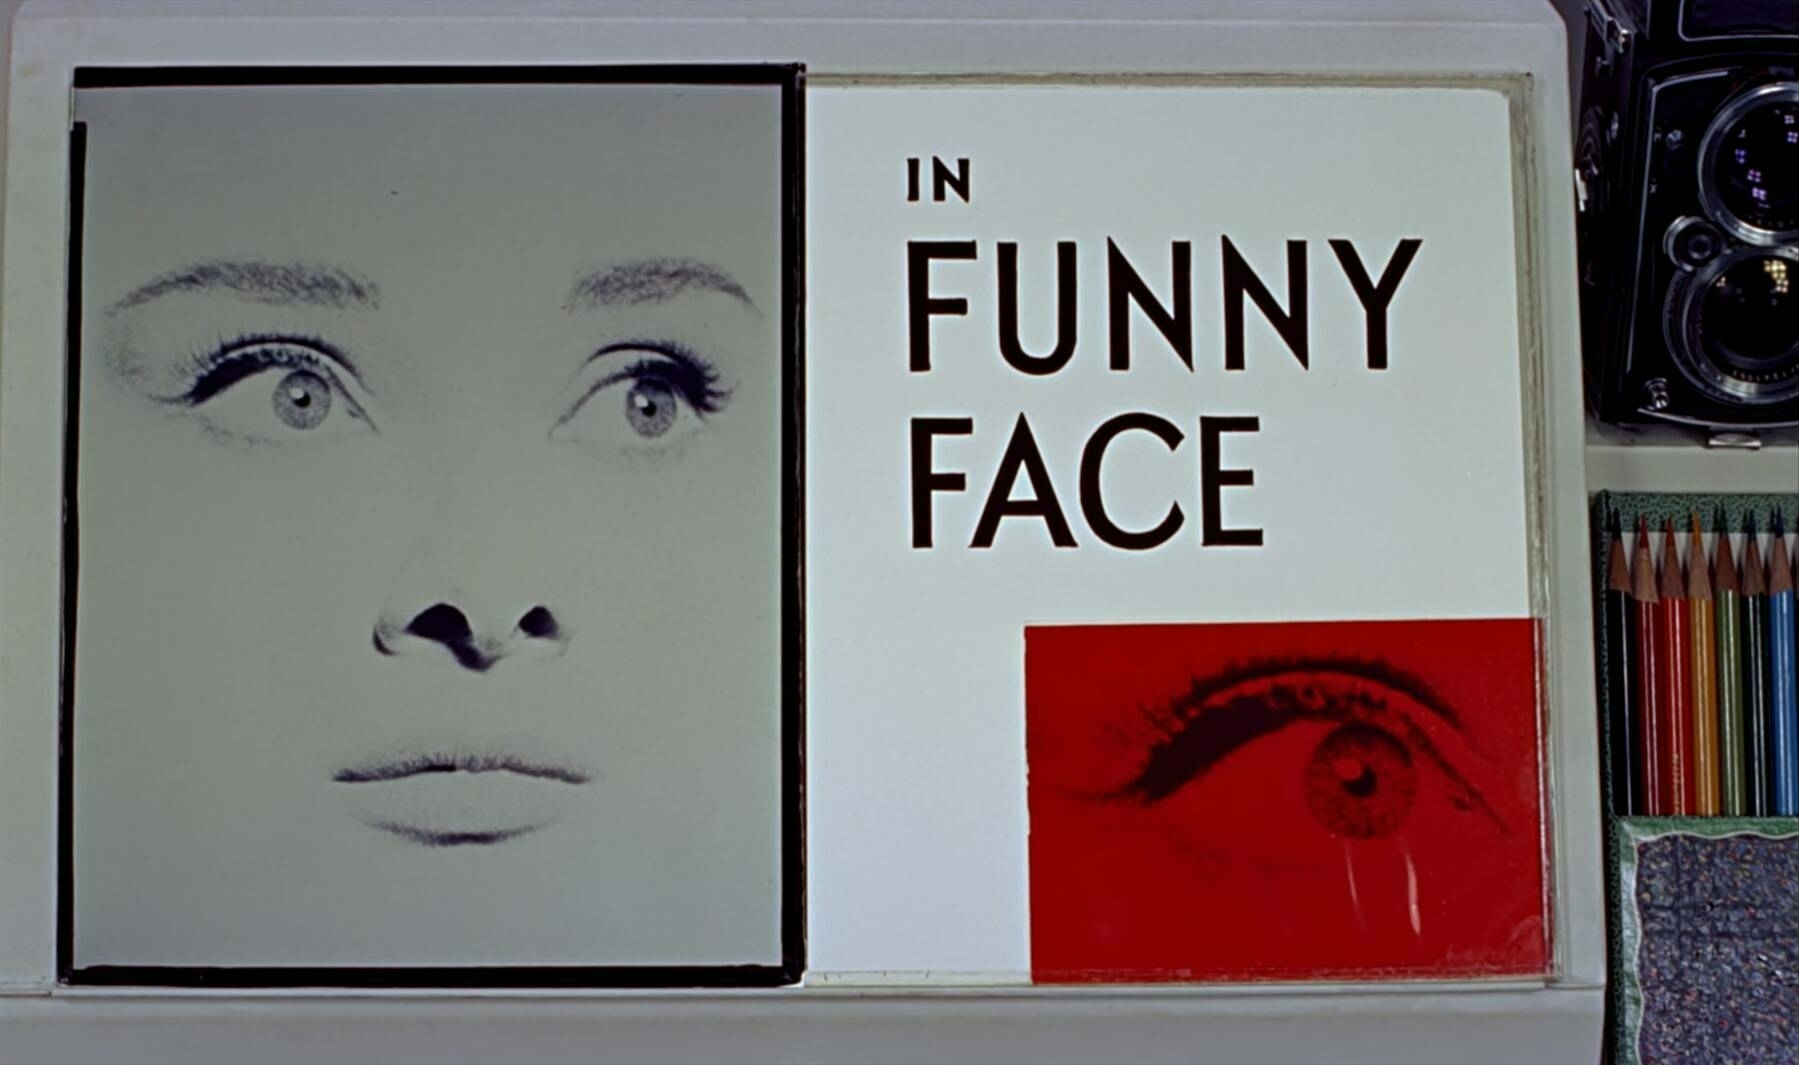 The title card for the film, Funny Face.